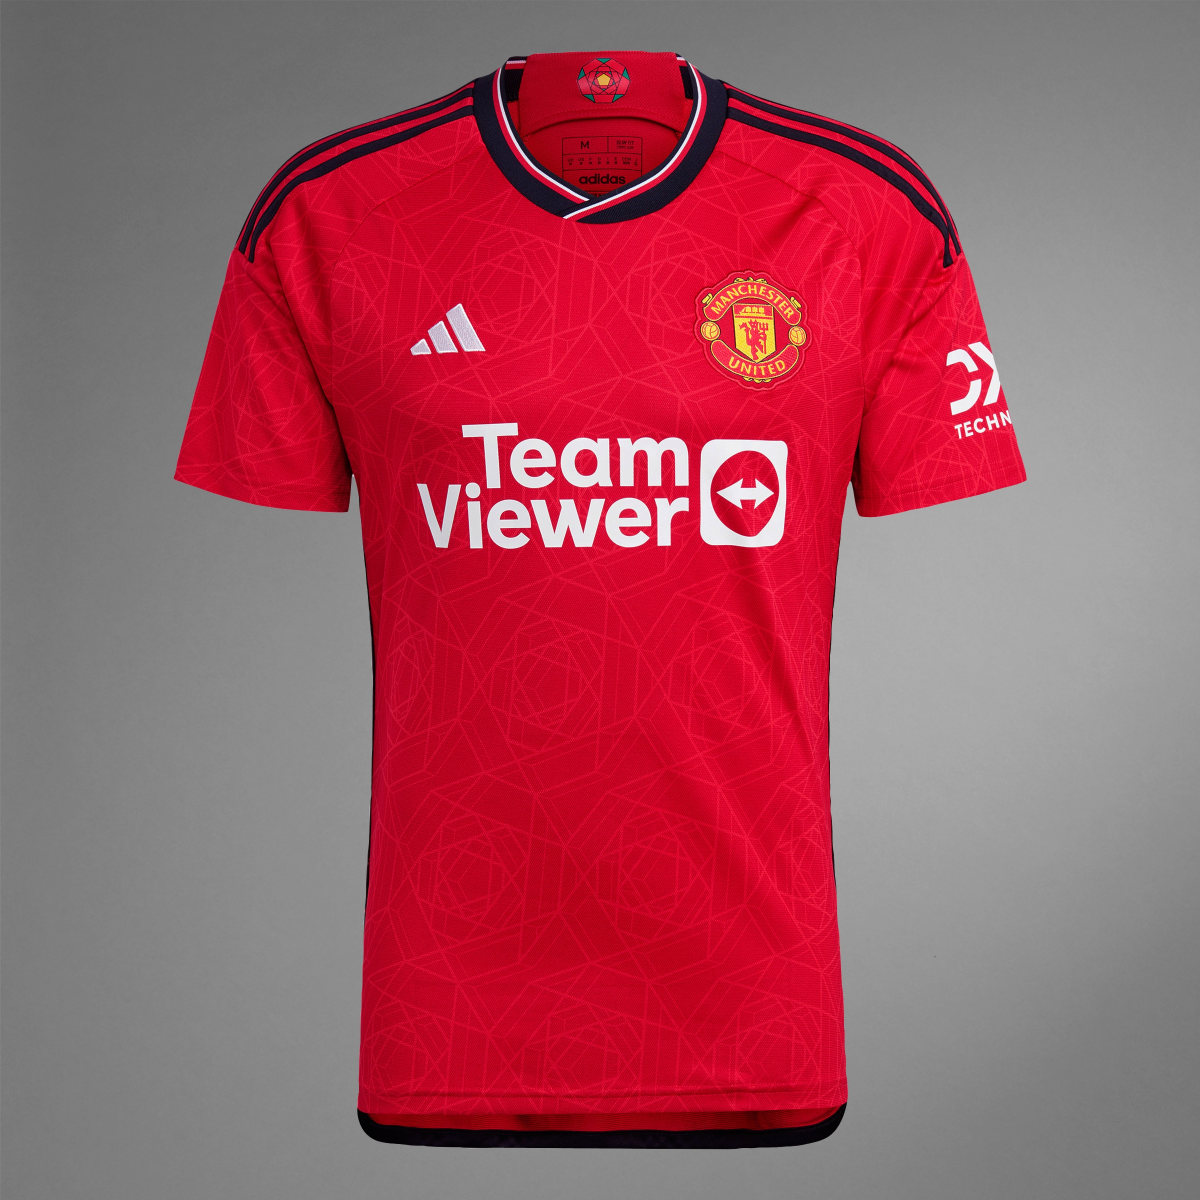 Adidas Jersey Local Manchester United 23/24. 10